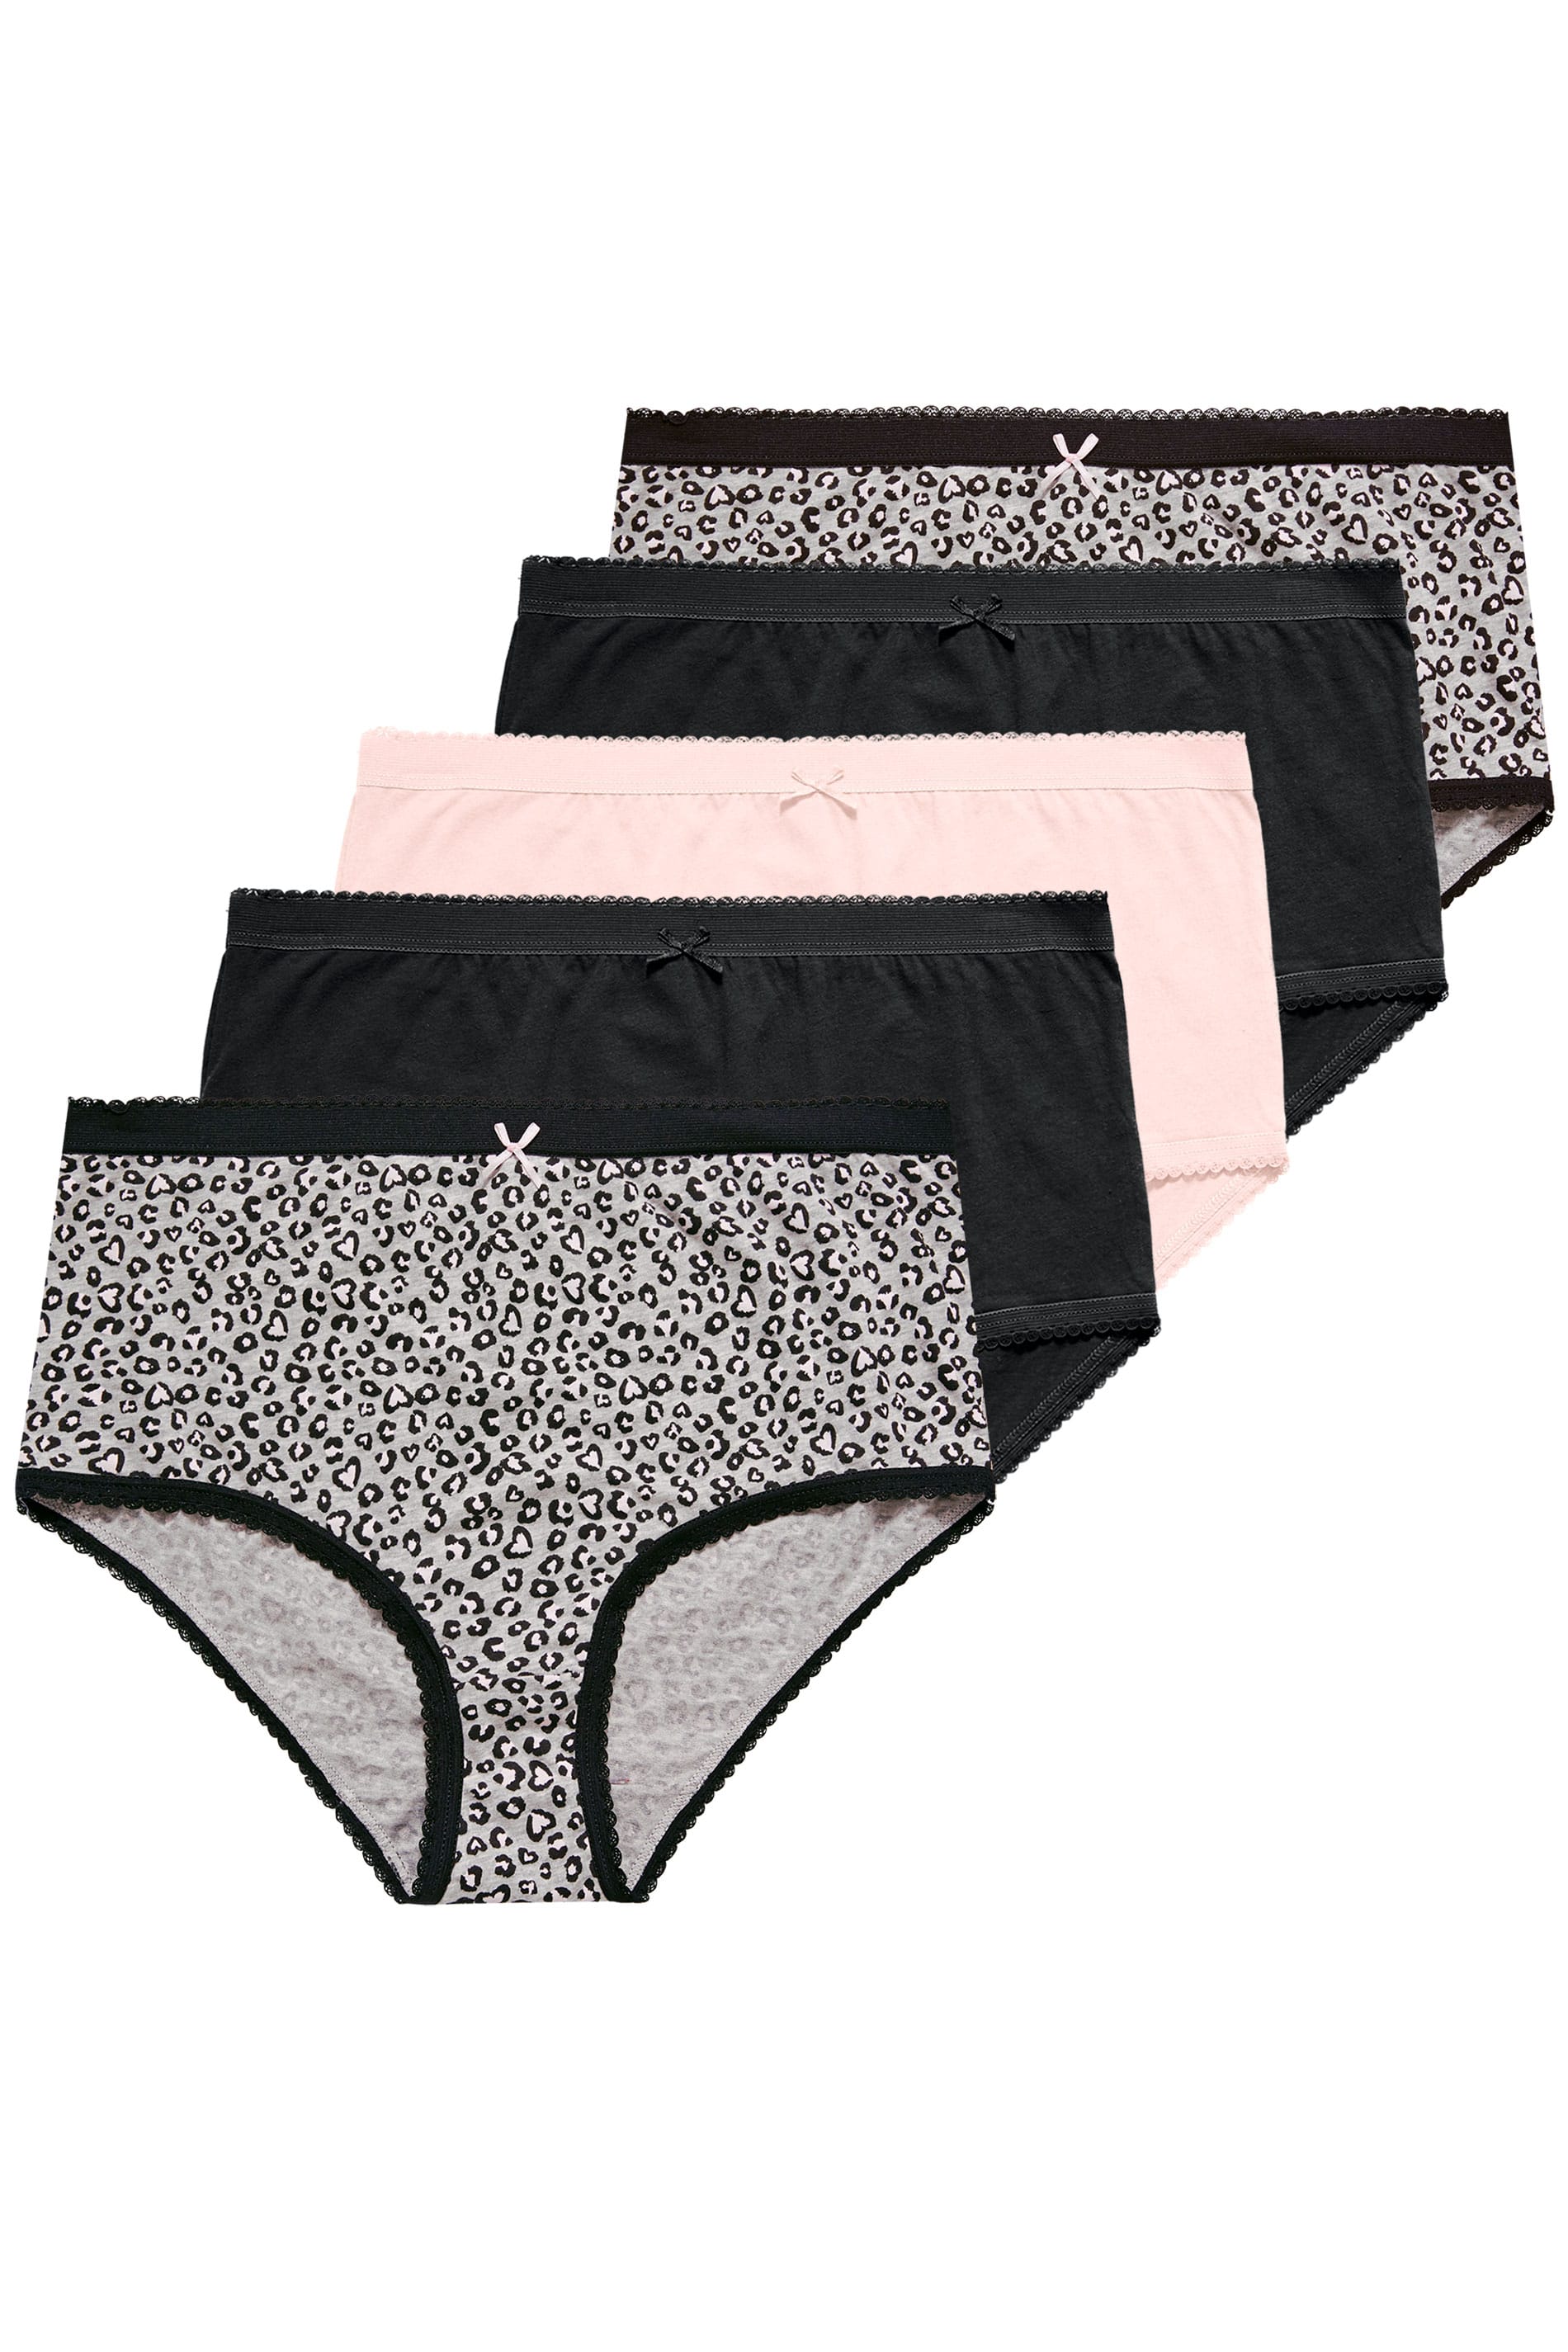 5 PACK Grey & Pink Leopard Print Briefs | Yours Clothing